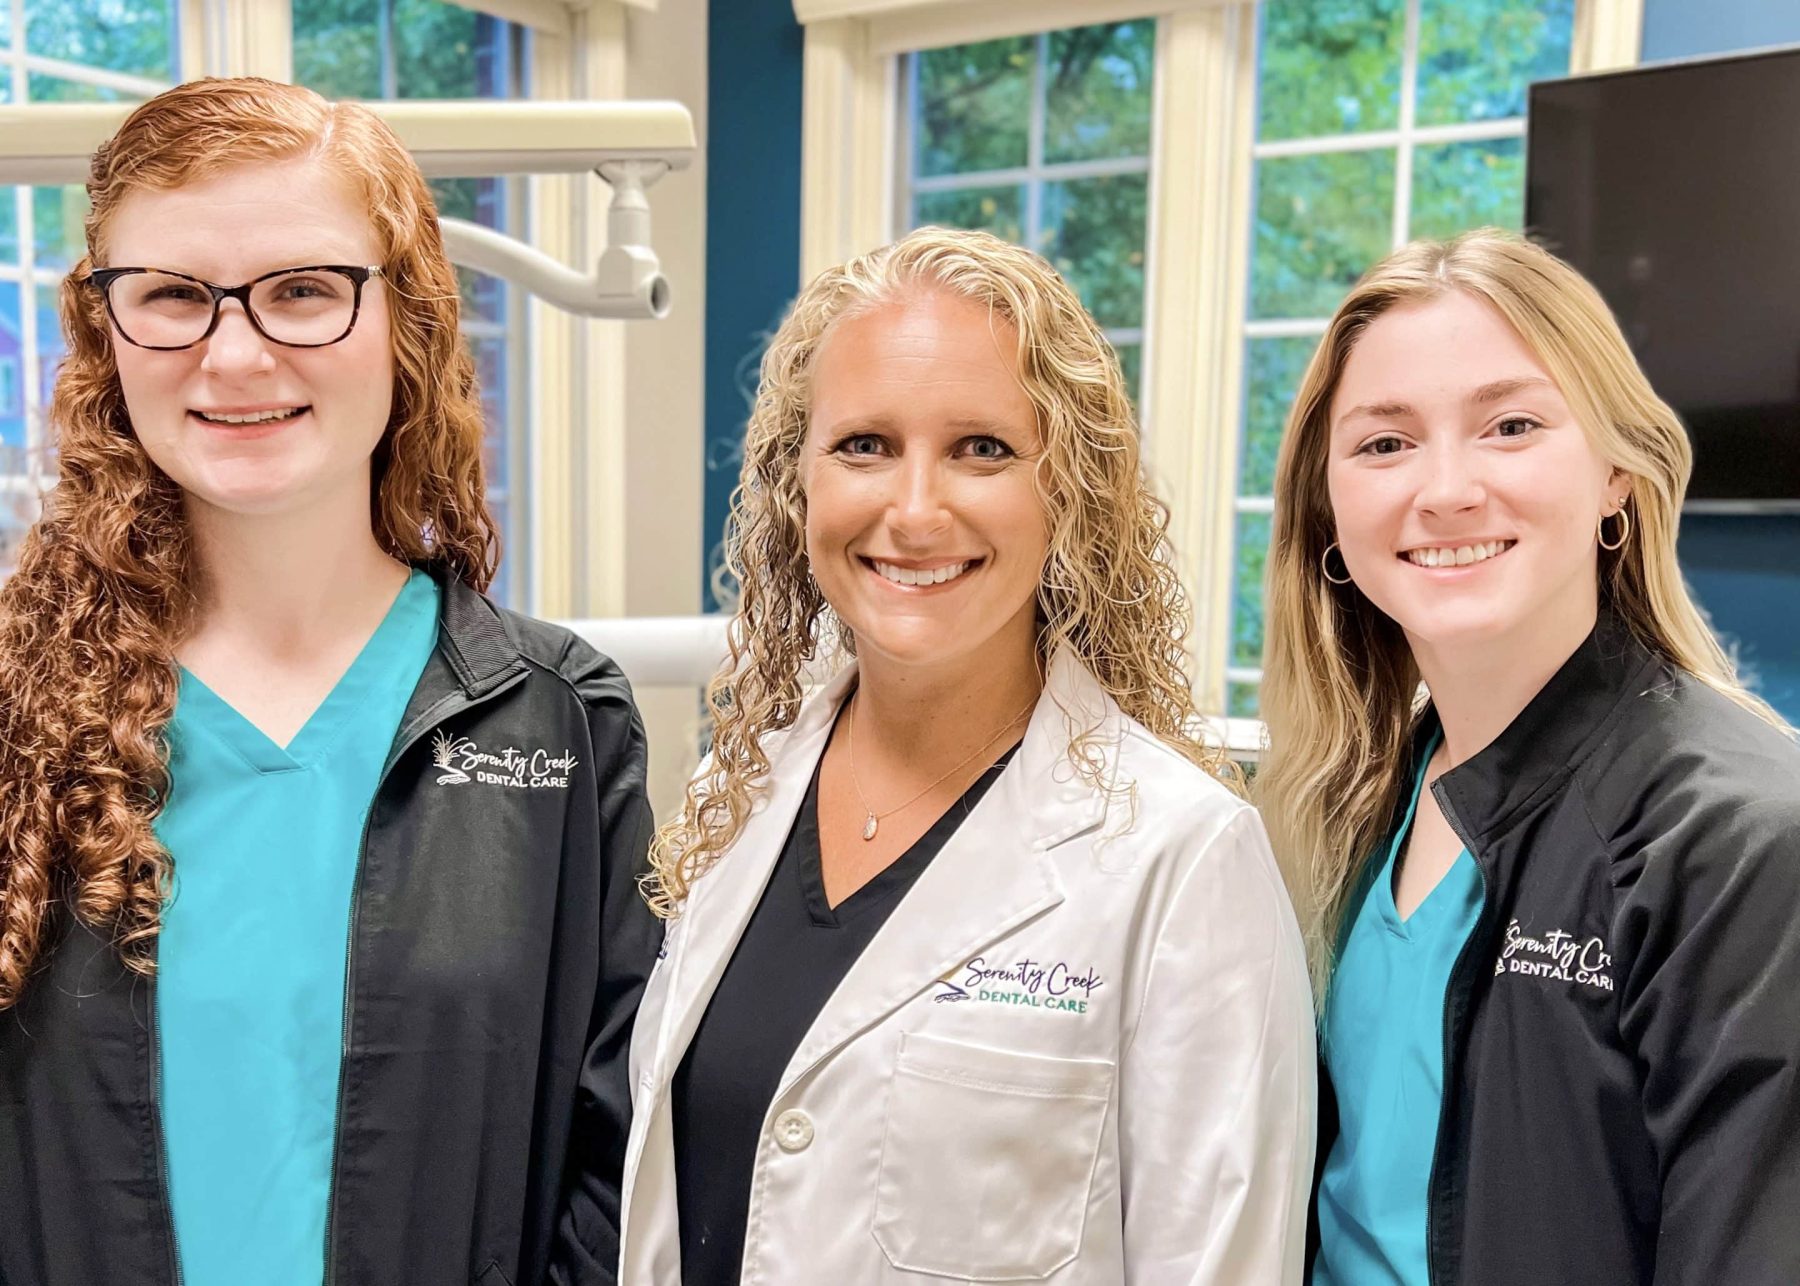 Dr. Kelly and her team at Serenity Creek Dental Care in Noblesville, IN